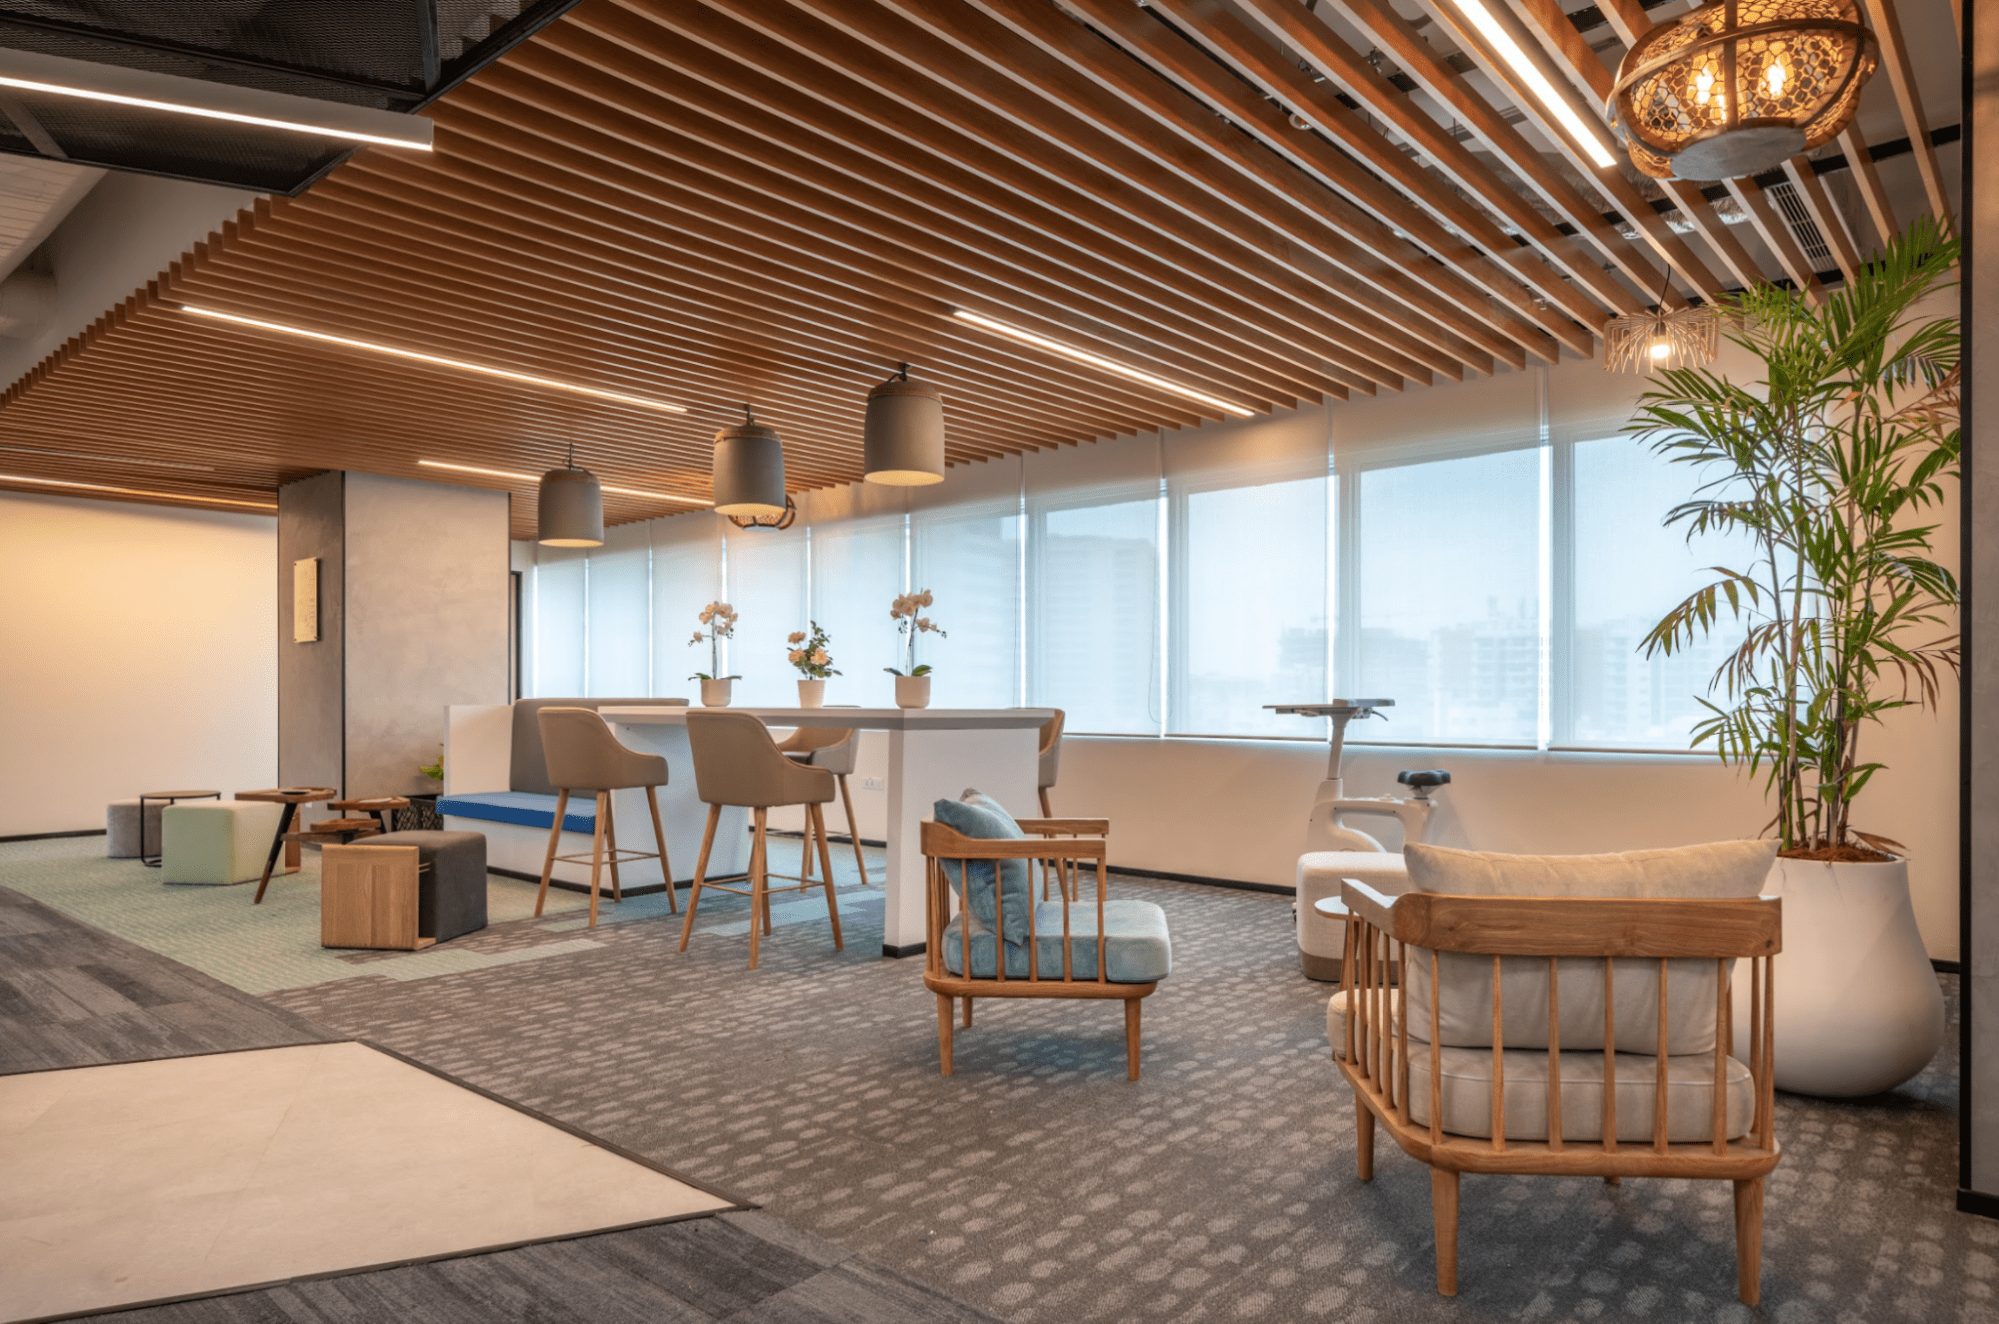 A visually aesthetic and experimental space for Verizon Hyderabad office resulted in employee wellbeing